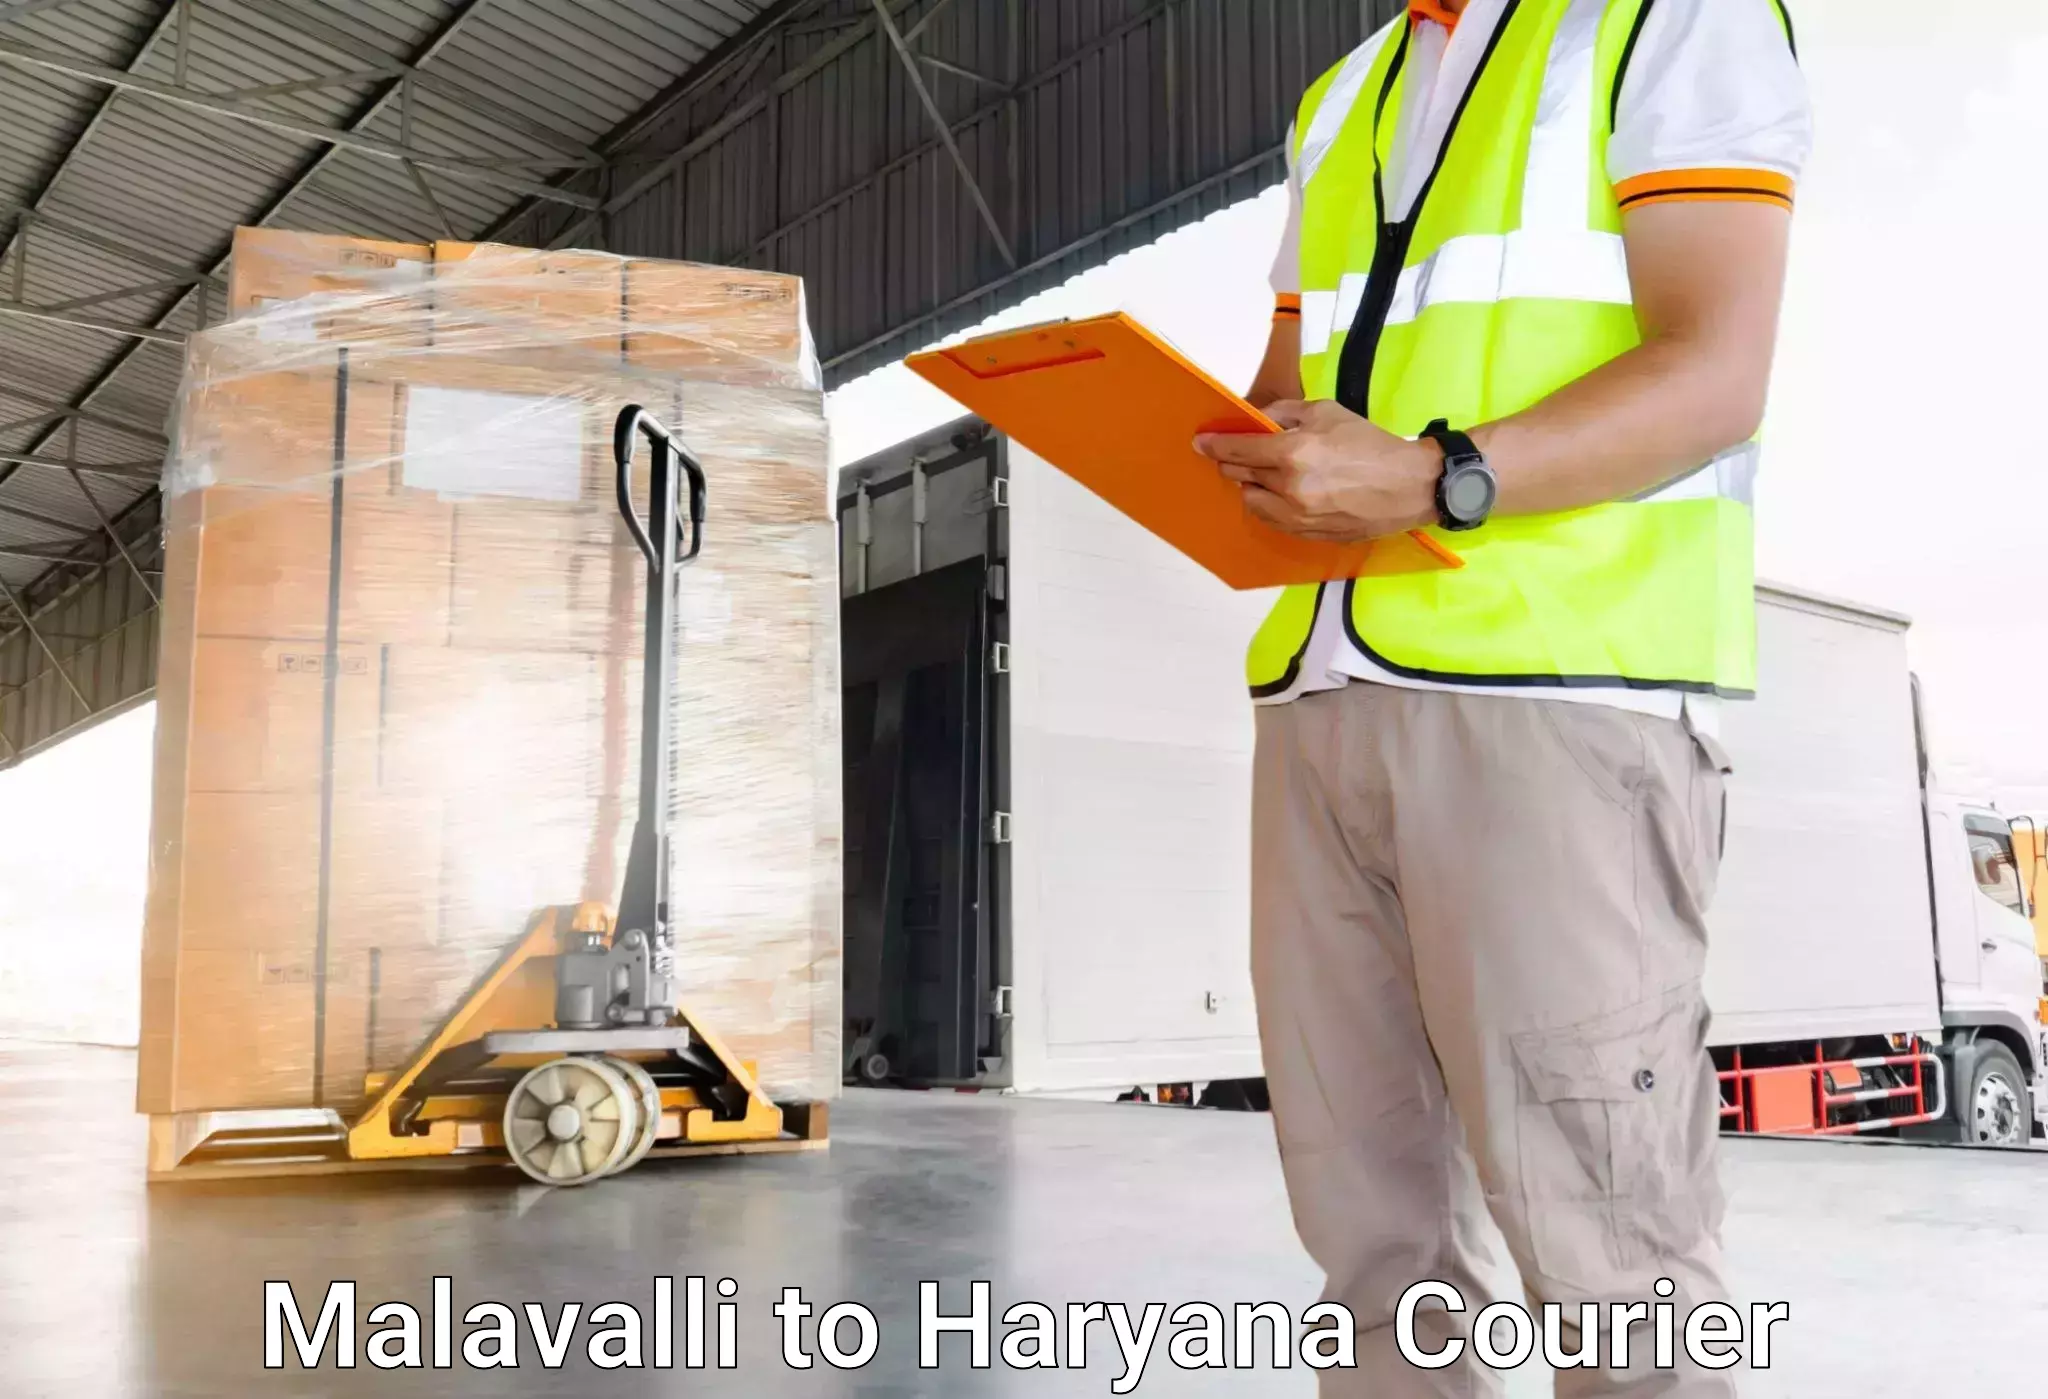 Luggage delivery app Malavalli to Haryana